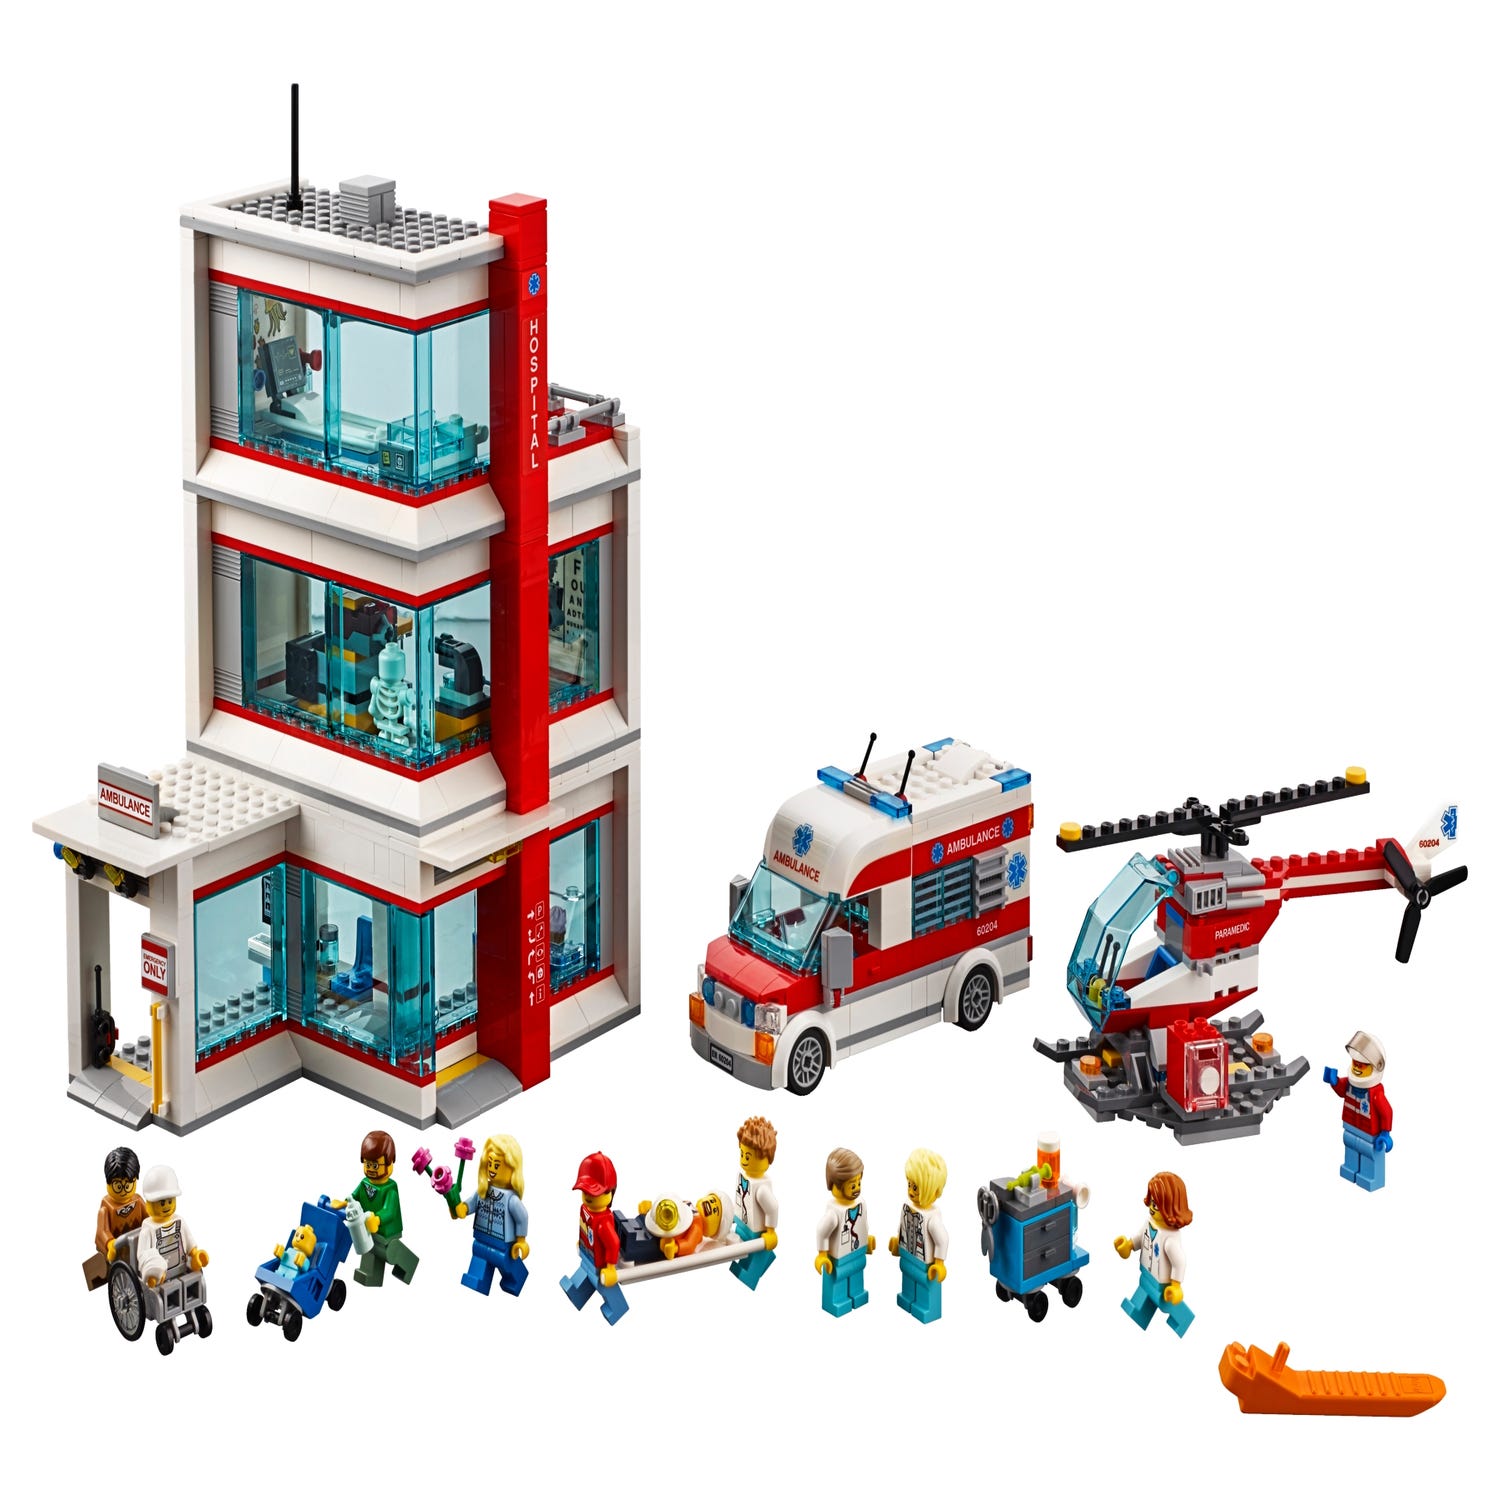 LEGO® City Hospital 60204 | City online at the Official LEGO® Shop